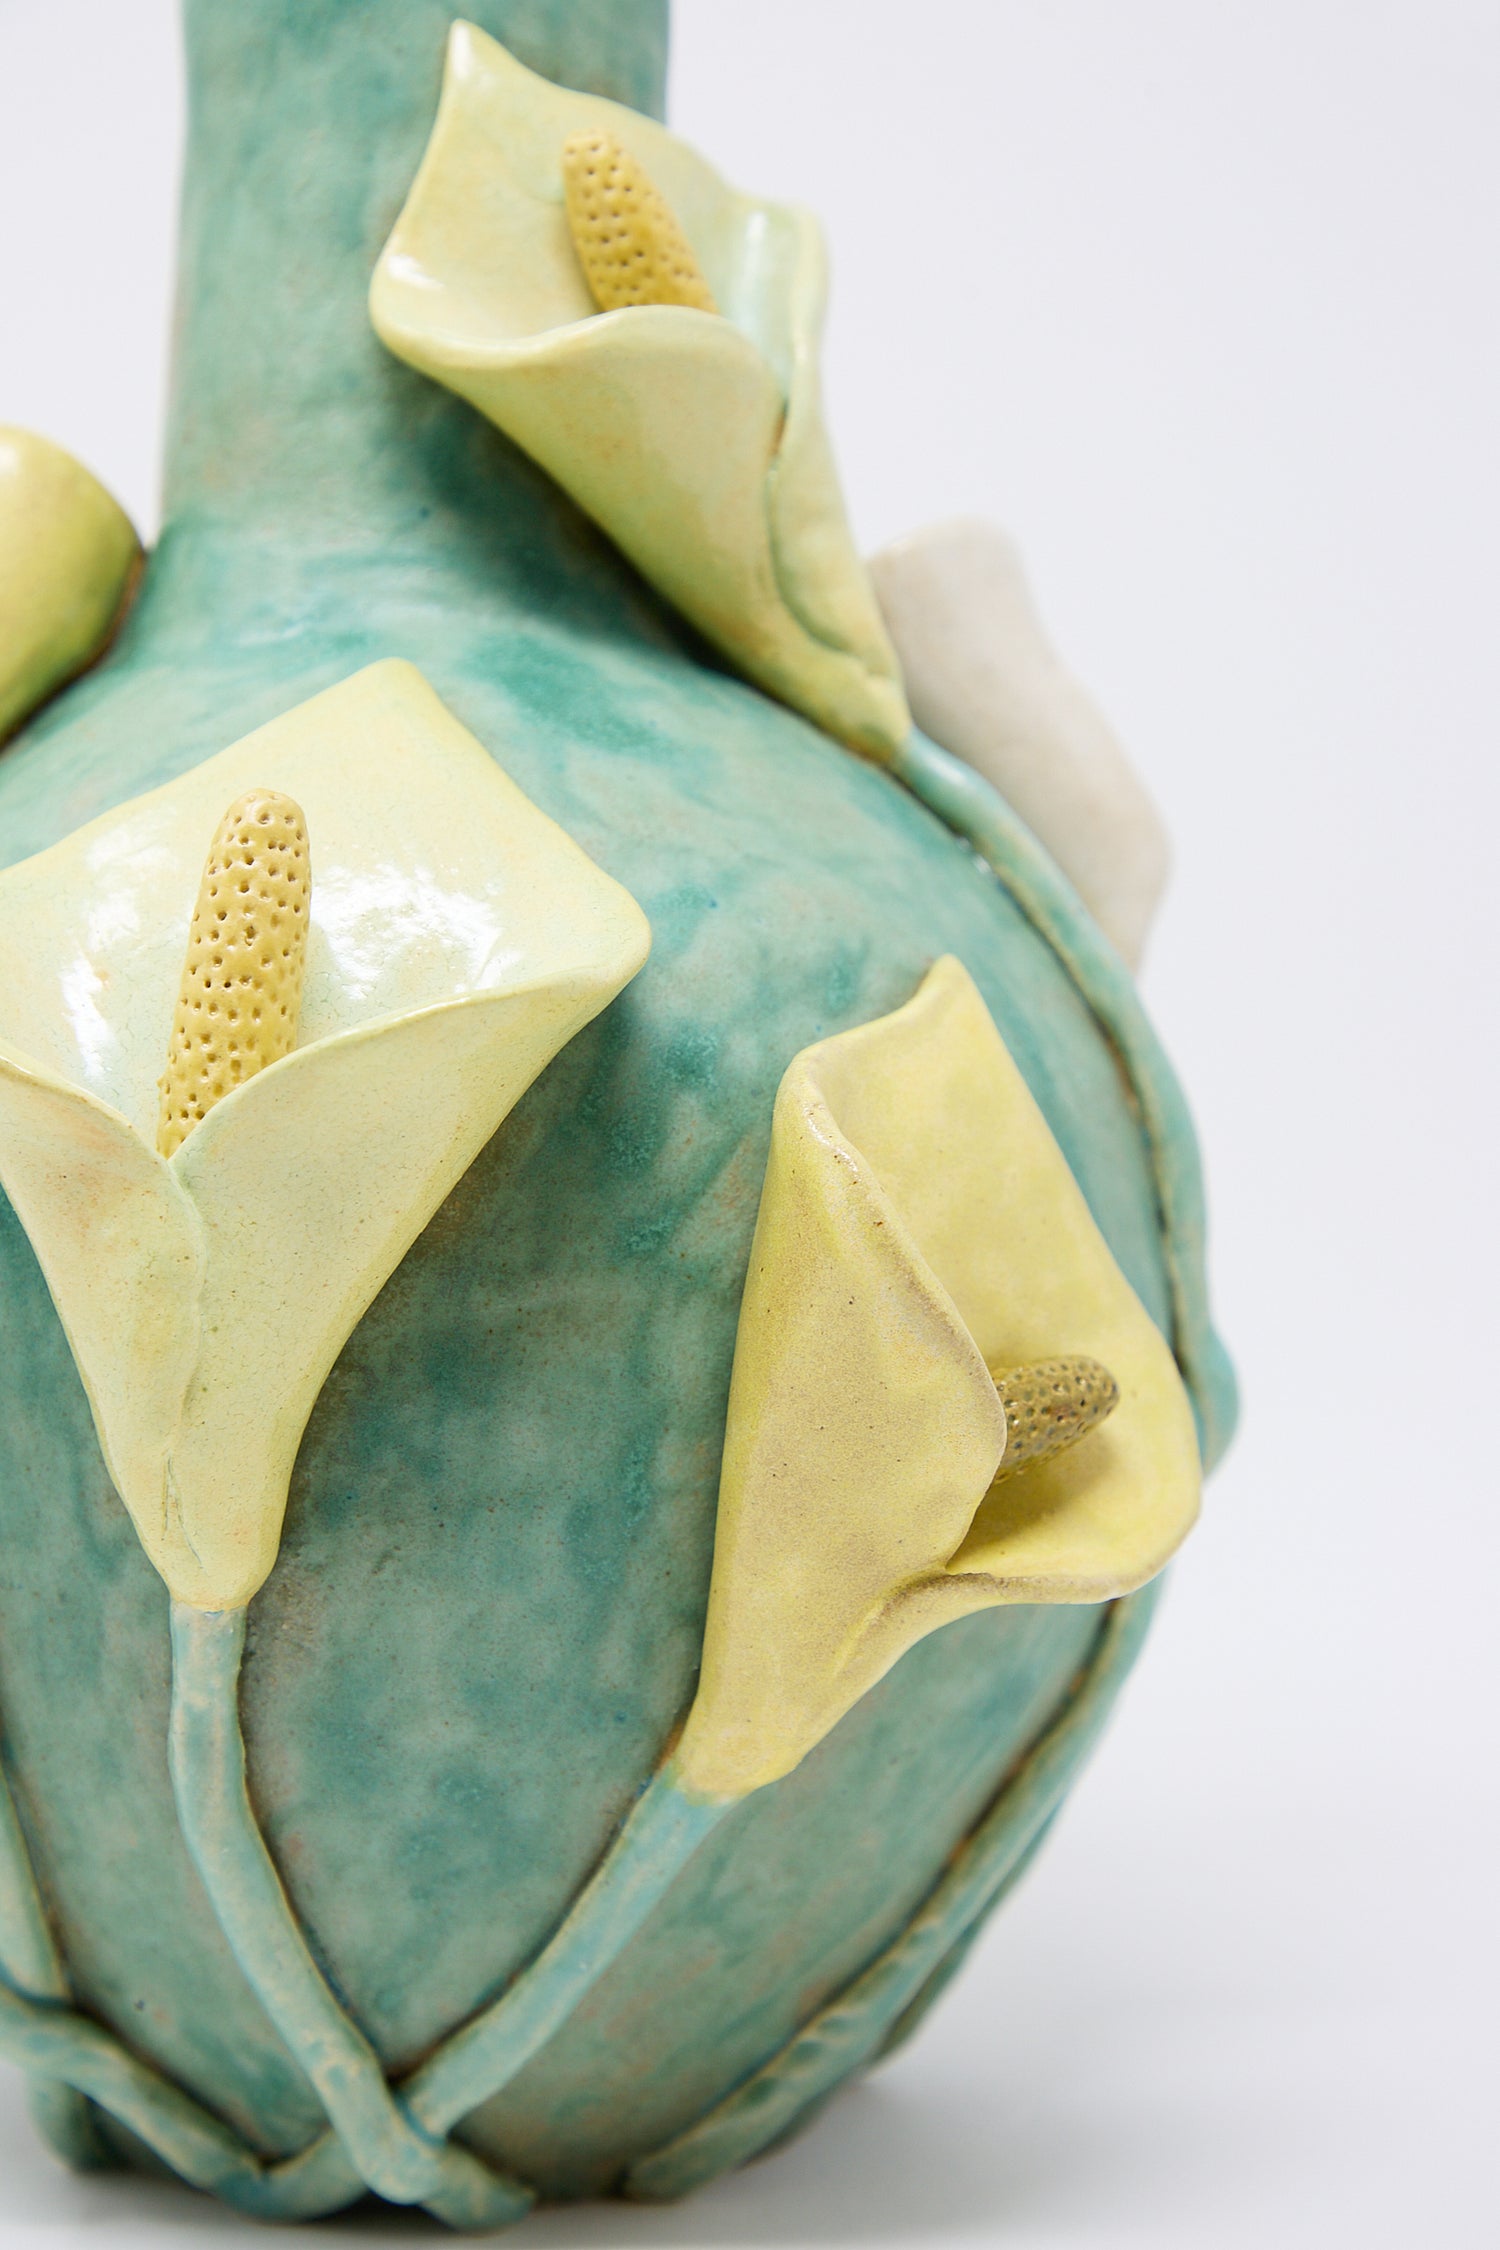 Close-up of a glazed stoneware Calla Vase by Pearce Williams with a textured turquoise surface and three-dimensional yellow calla lily decorations.